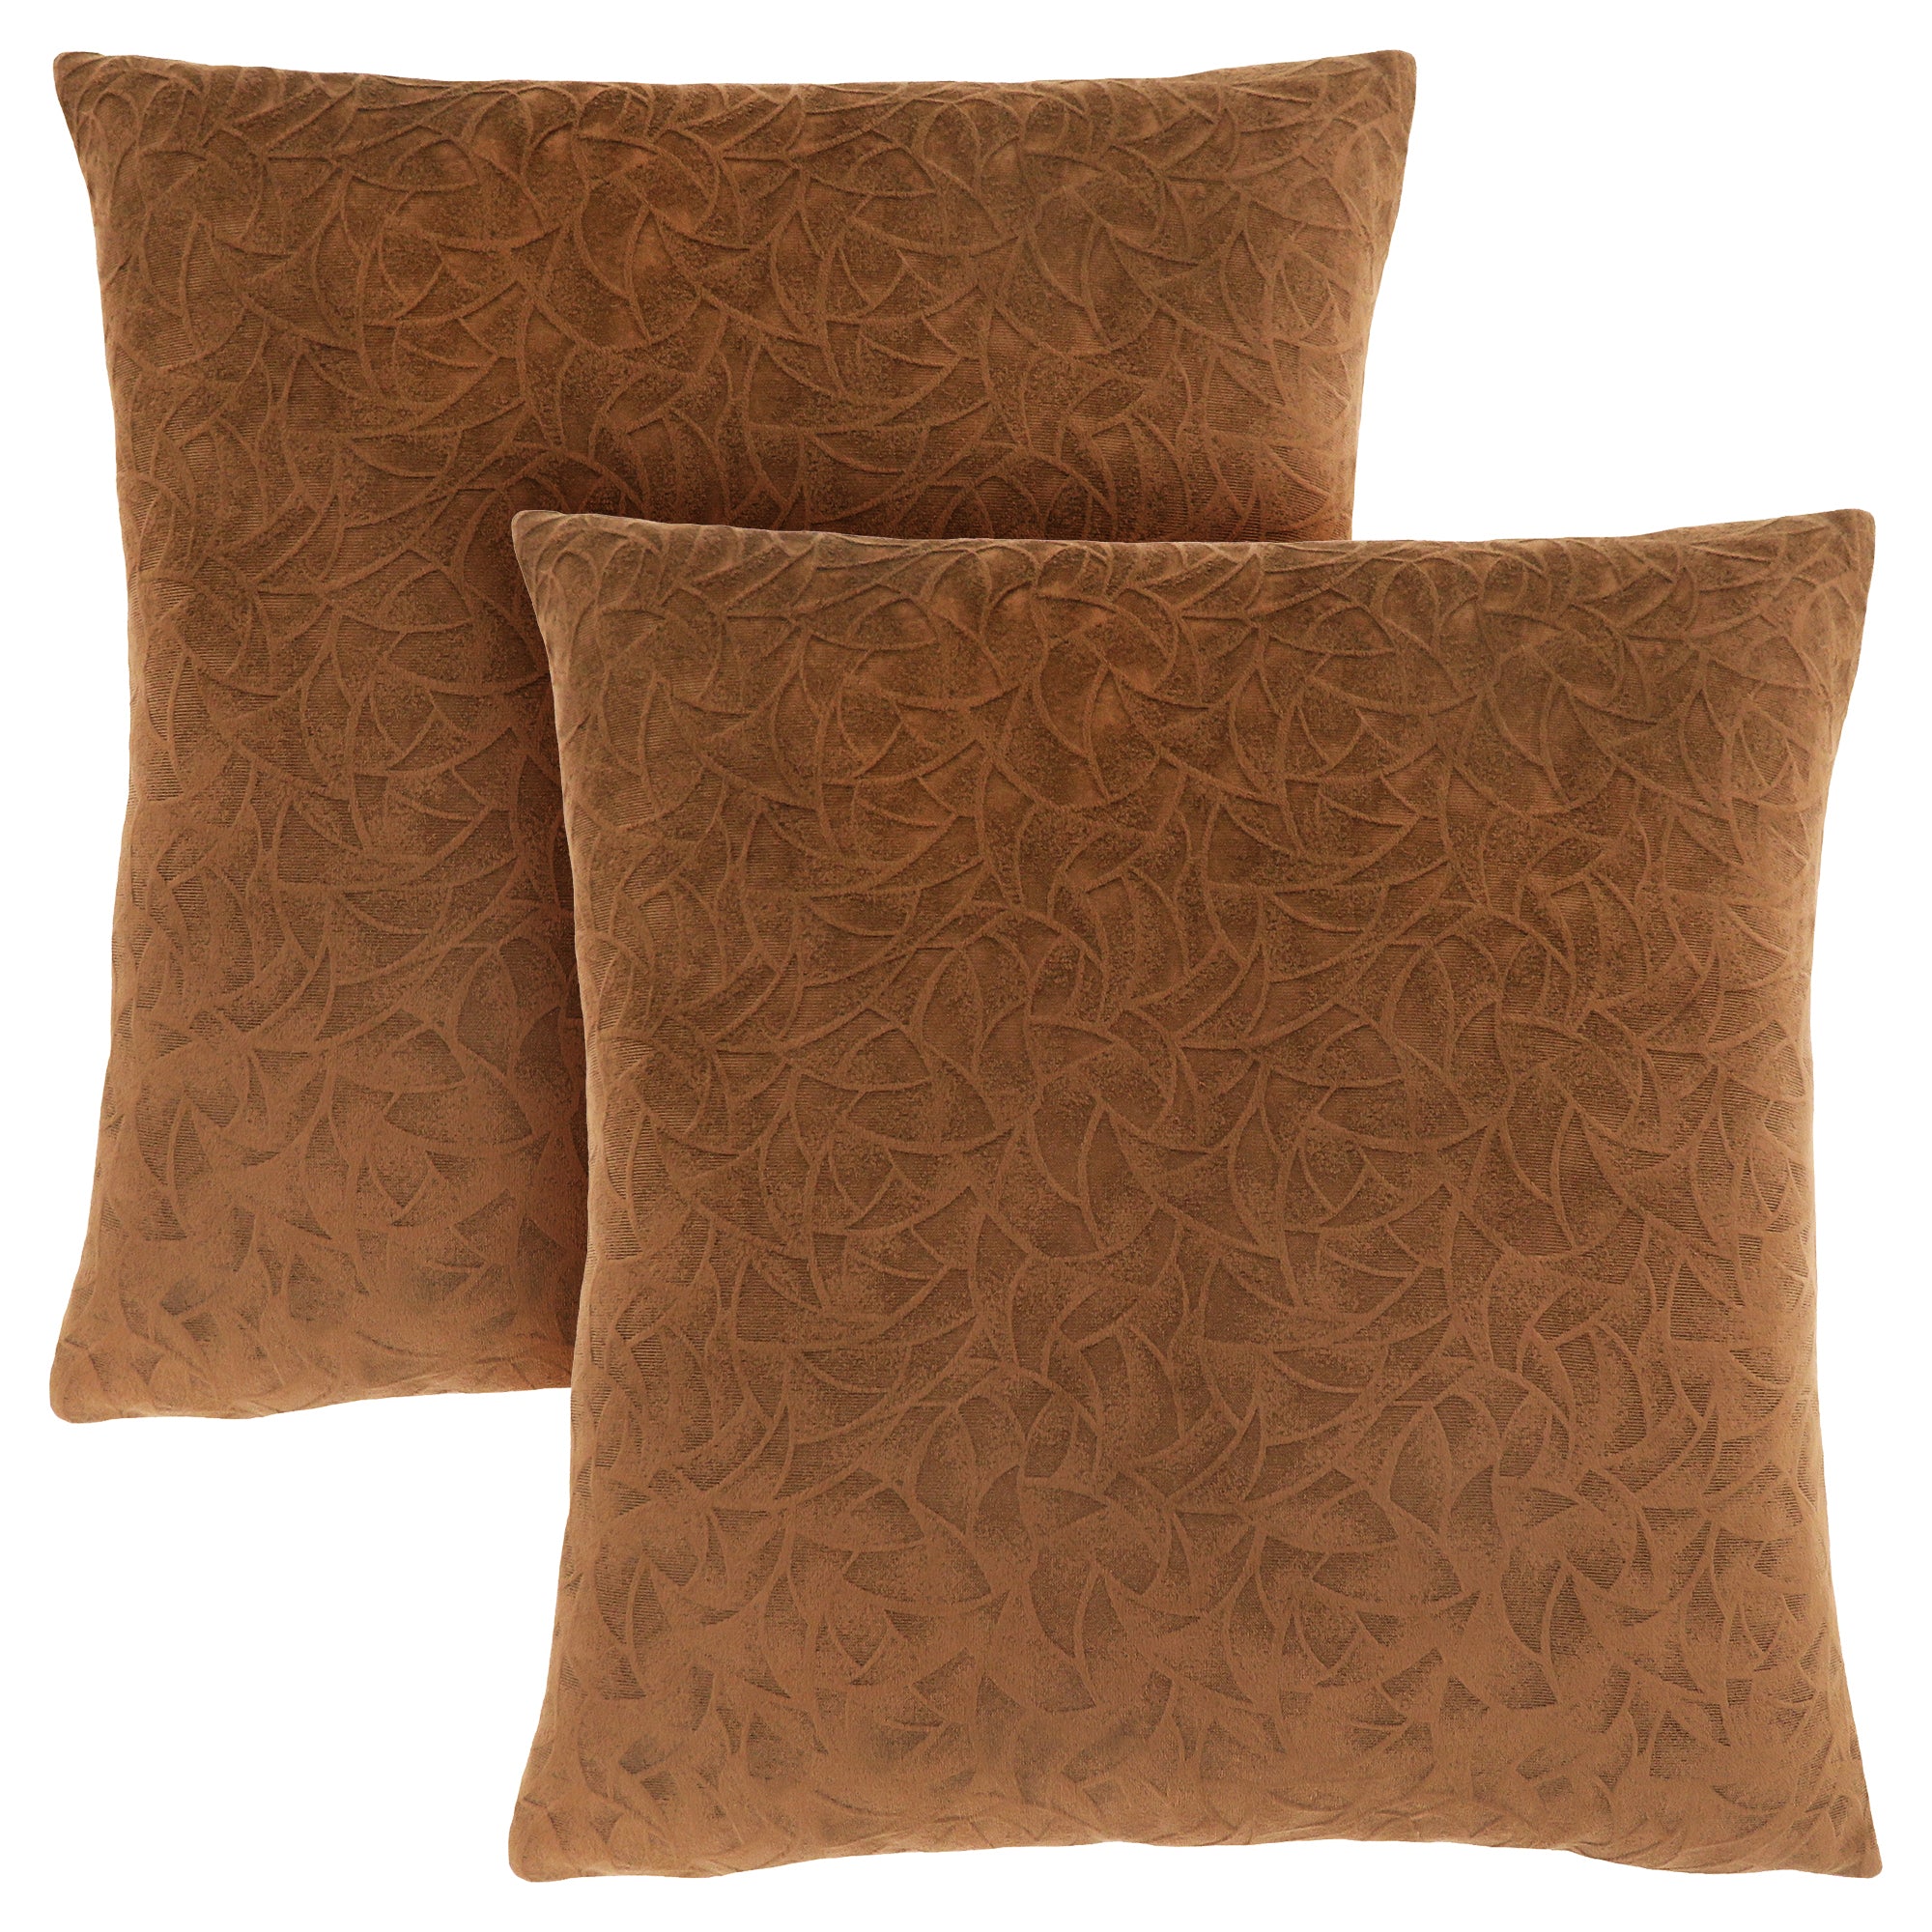 MN-679269    Pillows, Set Of 2, 18 X 18 Square, Insert Included, Decorative Throw, Accent, Sofa, Couch, Bed, Soft Polyester Woven Fabric, Hypoallergenic Soft Polyester Insert, Light Brown, Transitional